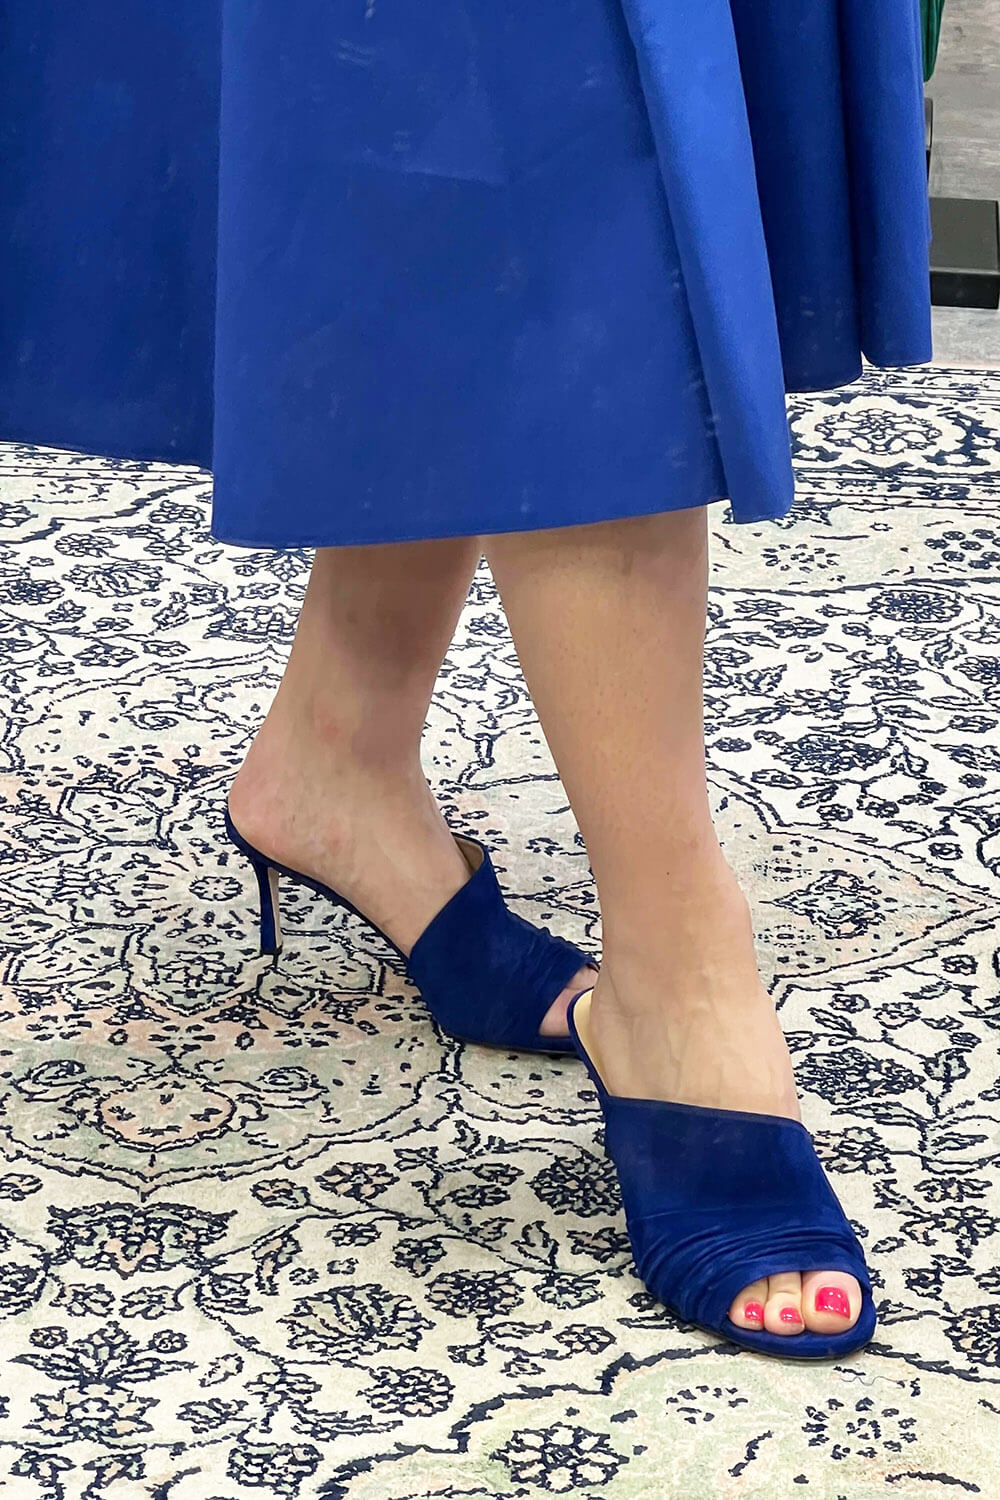 GIOVANNA GRAZZINI royal blue suede leather mules with pleated details SERENATA